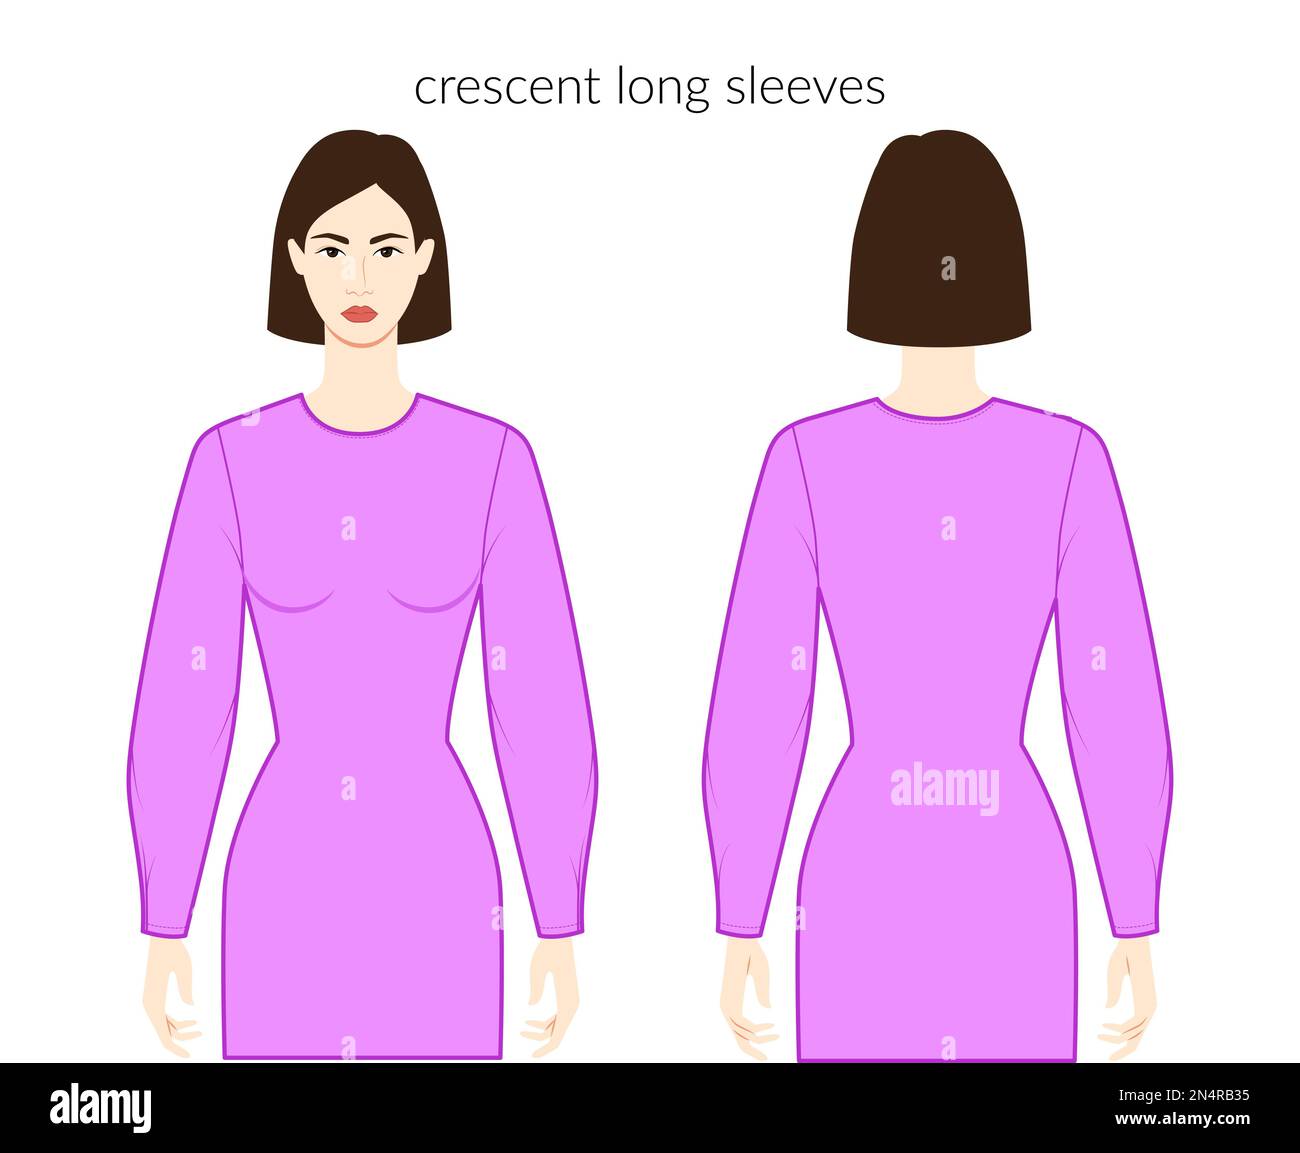 Crescent sleeves long length clothes character beautiful lady in purple top, shirt, dress technical fashion illustration, fitted. Flat apparel template front, back sides. Women, men unisex CAD mockup Stock Vector